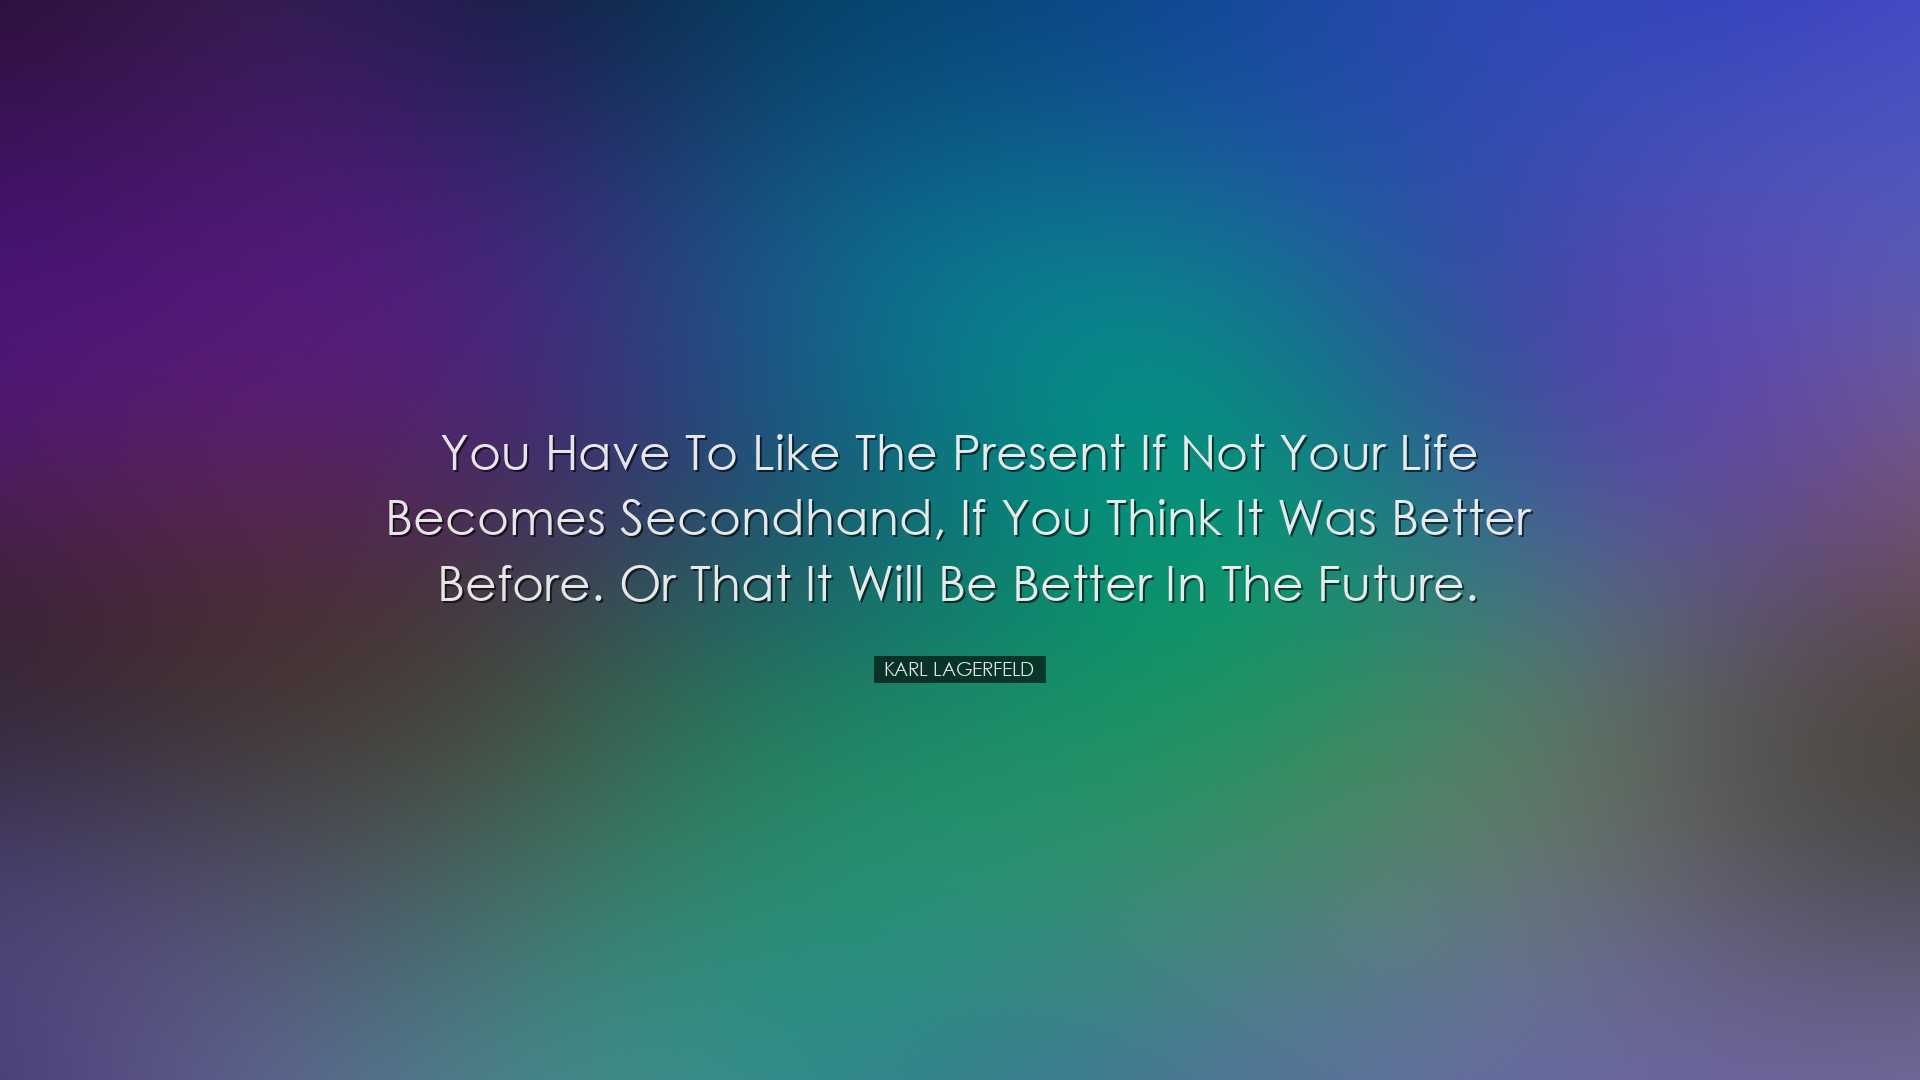 You have to like the present if not your life becomes secondhand,